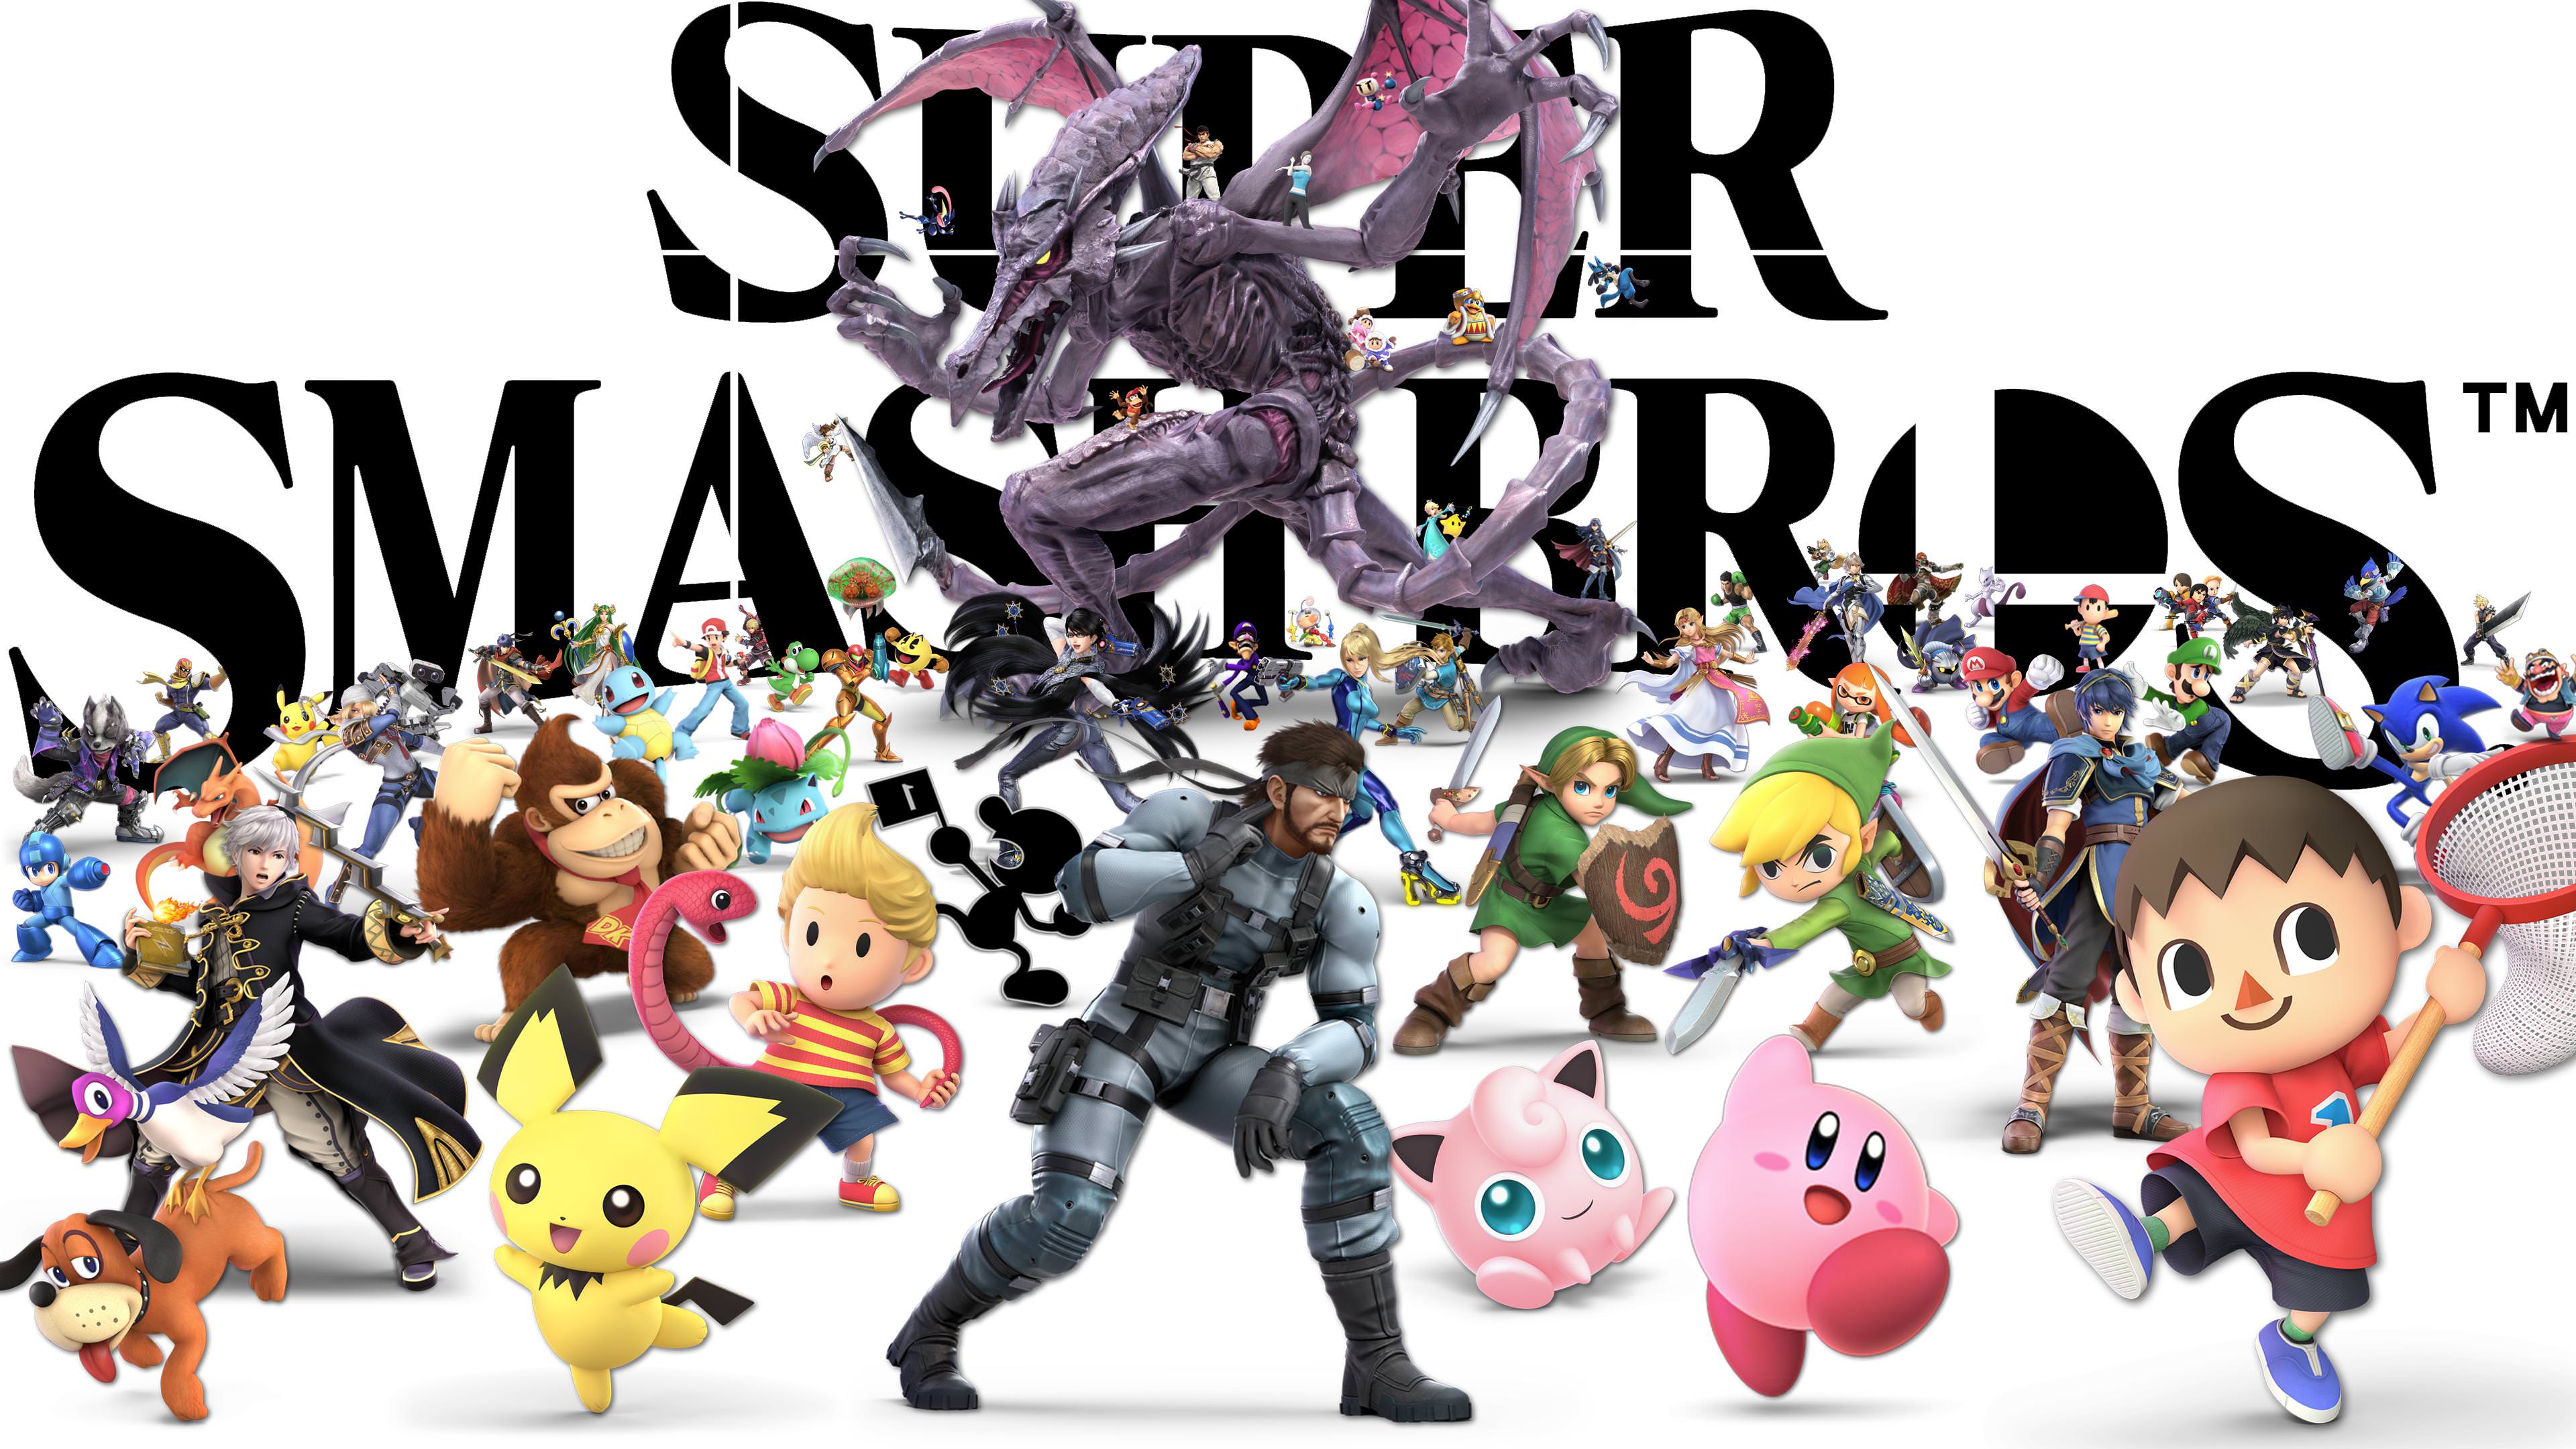 I Made A Super Smash Bros Ultimate Wallpaper Featuring All Of The